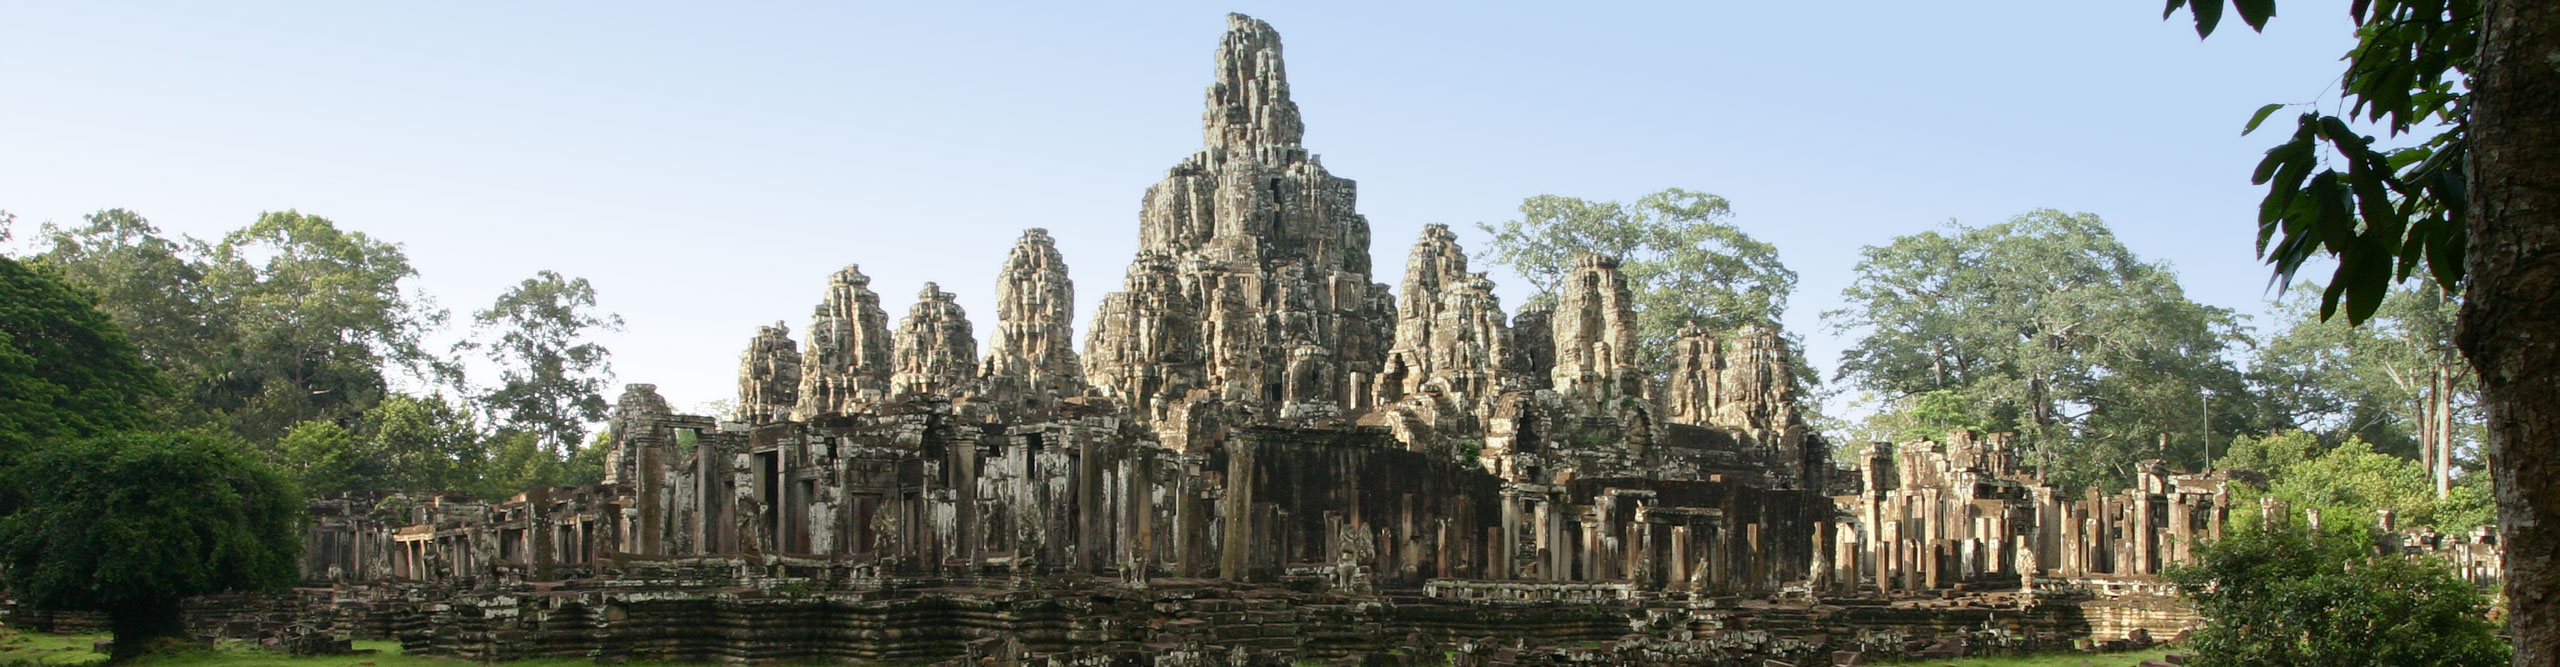 The mighty temple Angkor Thom, near Siem Reap, on a sunny day in Cambodia 